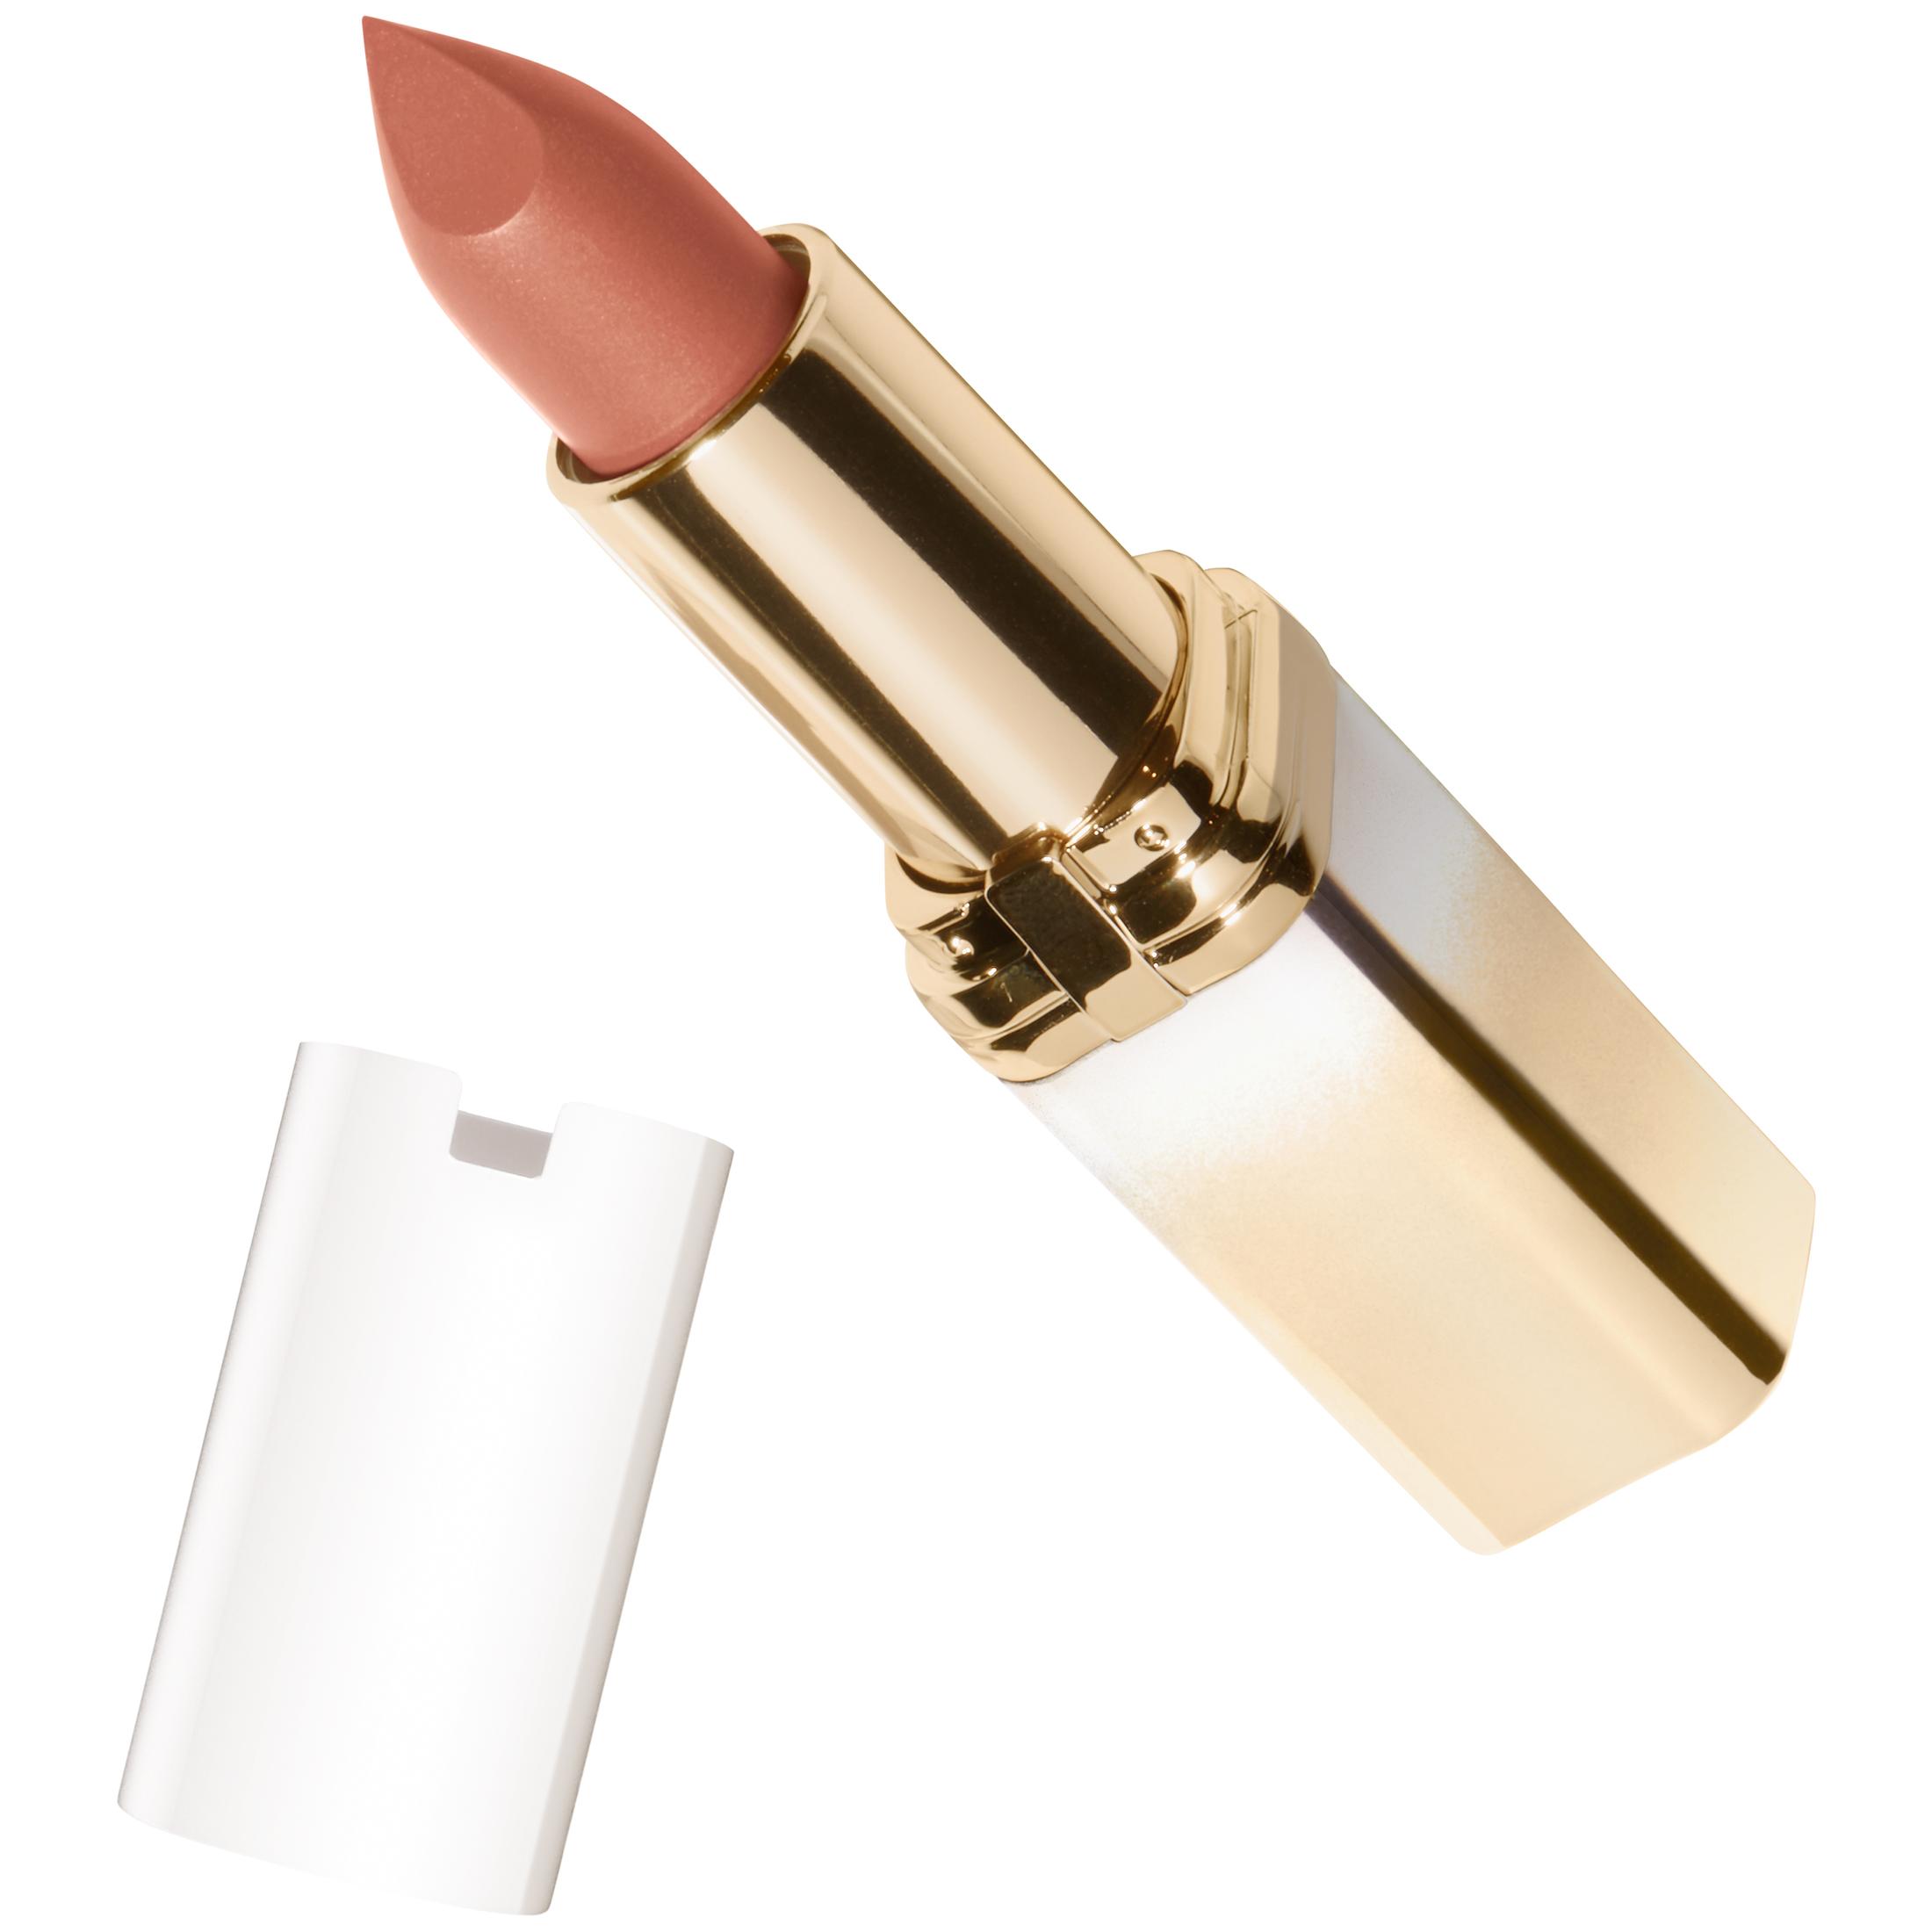 L'Oreal Paris Age Perfect Satin Lipstick, Glowing Nude - image 2 of 12